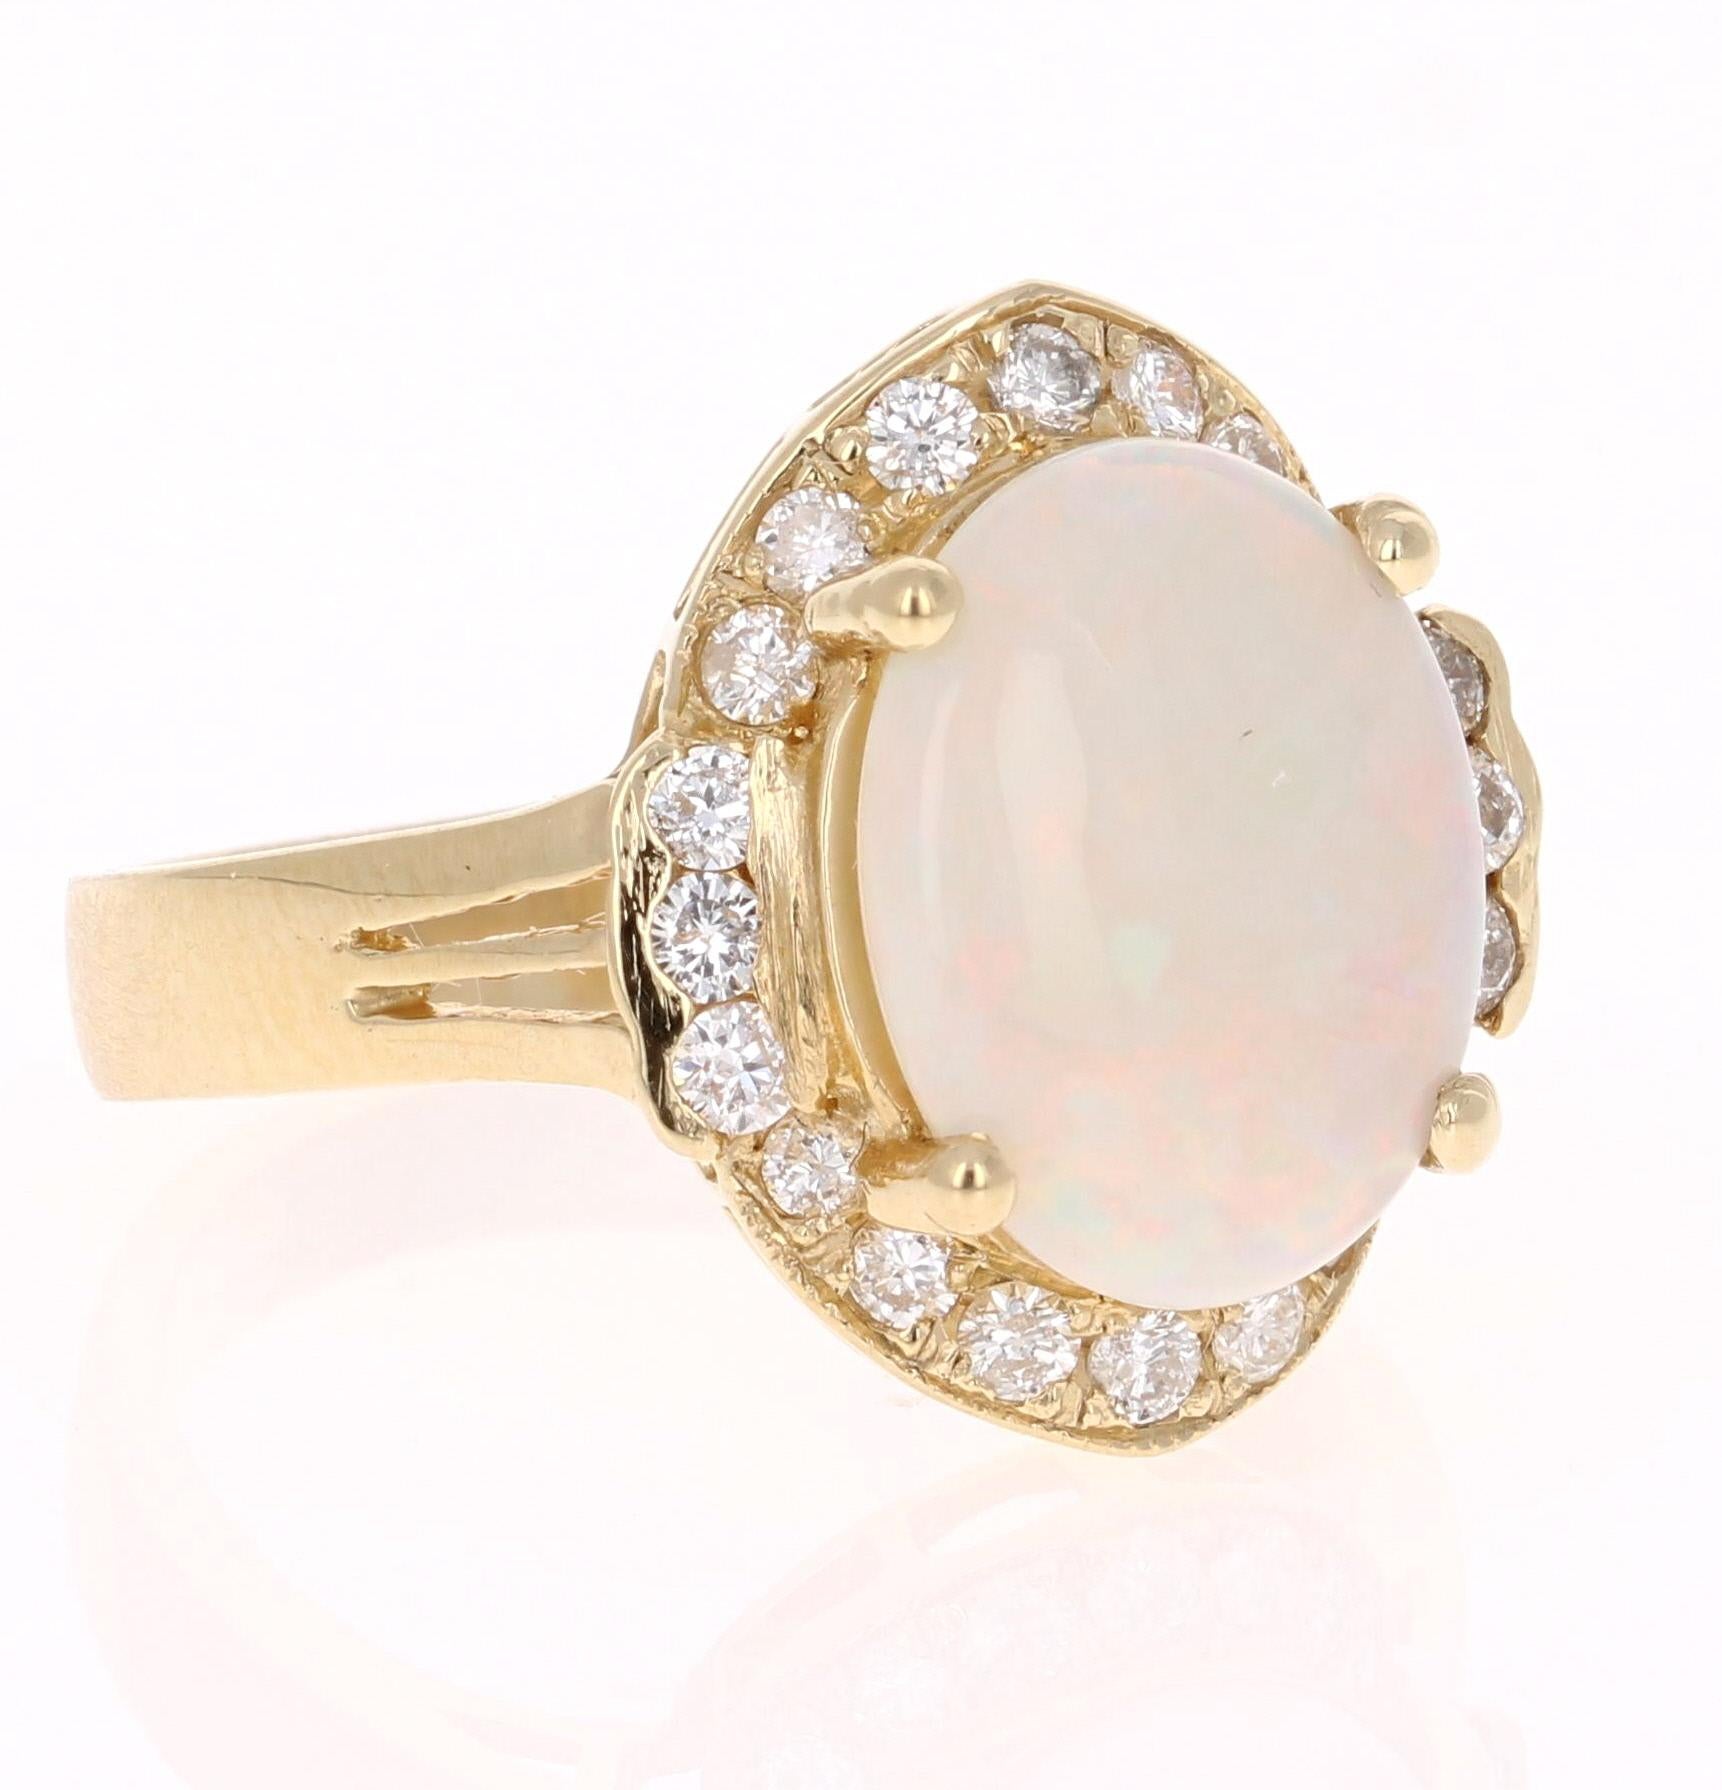 If you are on Opal lover, this ring is the perfect addition to your accessory collection!
This ring has a Oval Cut Opal that weighs 2.29 carats and is surrounded by 20 Round Cut Diamonds that weigh 0.46 carat.  The total carat weight of this ring is